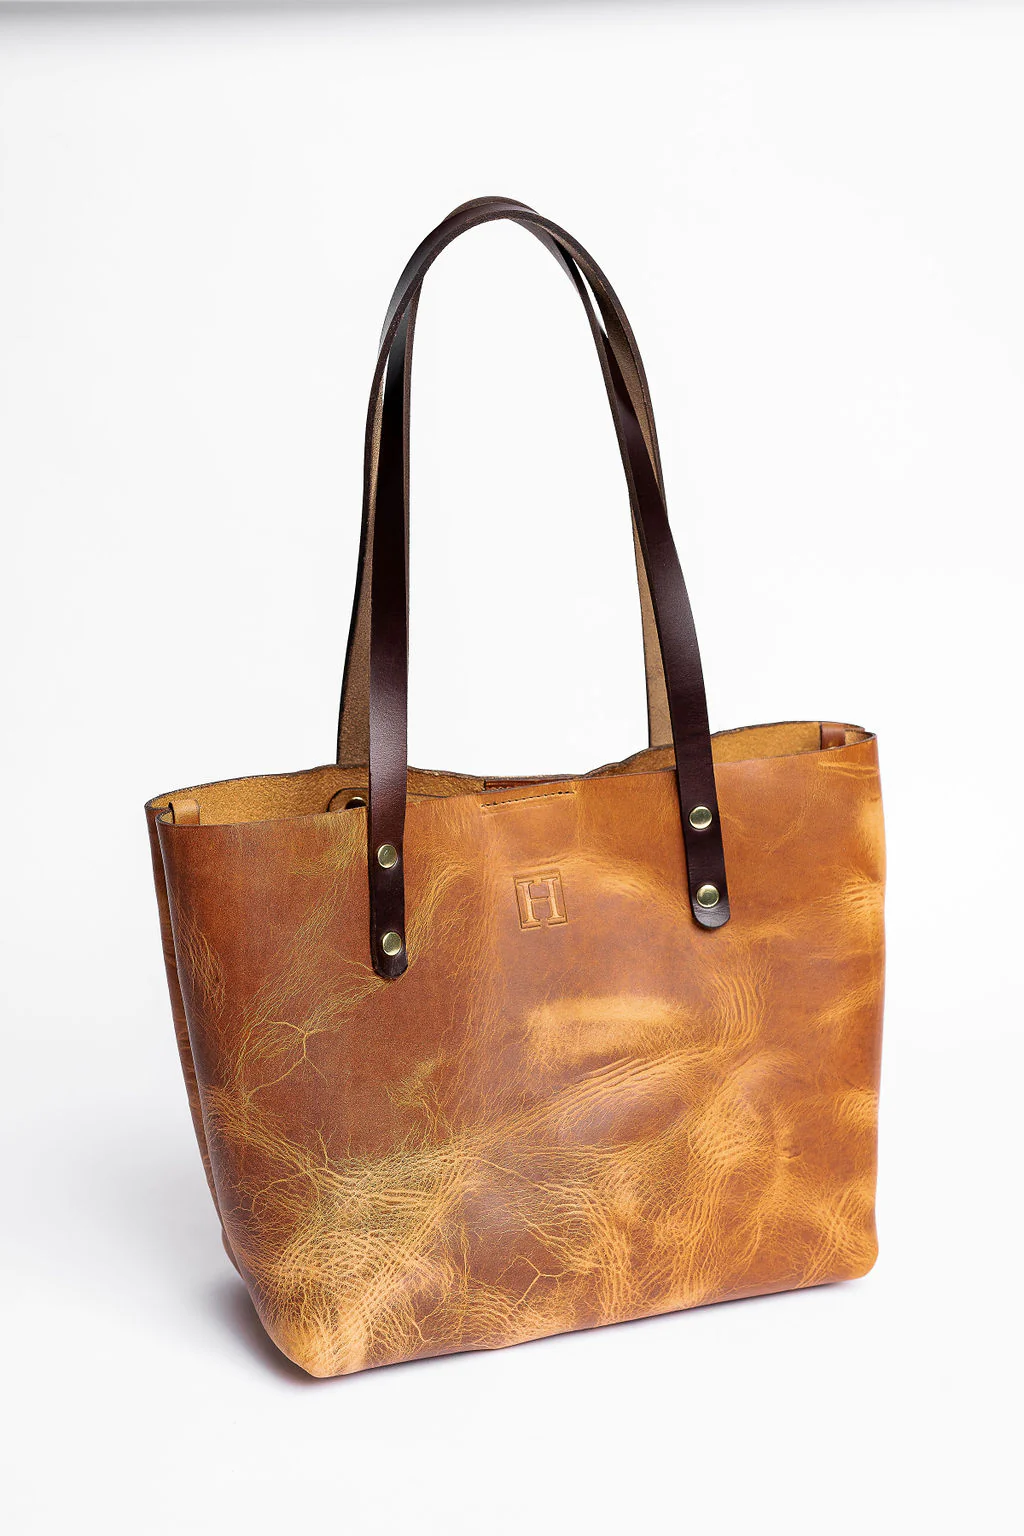 Hooks Leather Tote Purse - Rivers & Glen Trading Co.